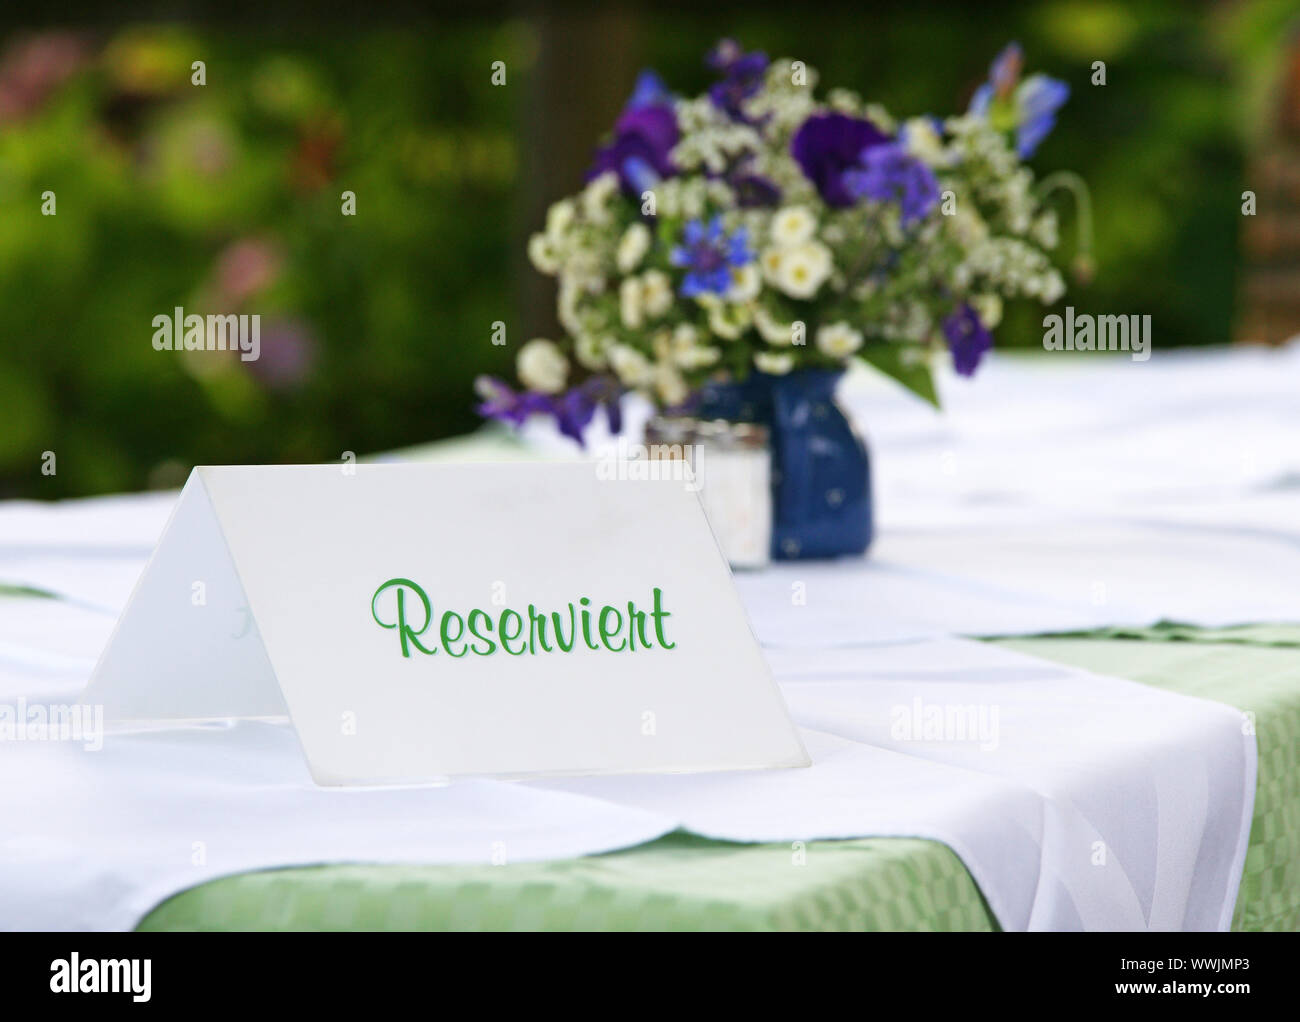 Reservation at the restaurant Stock Photo